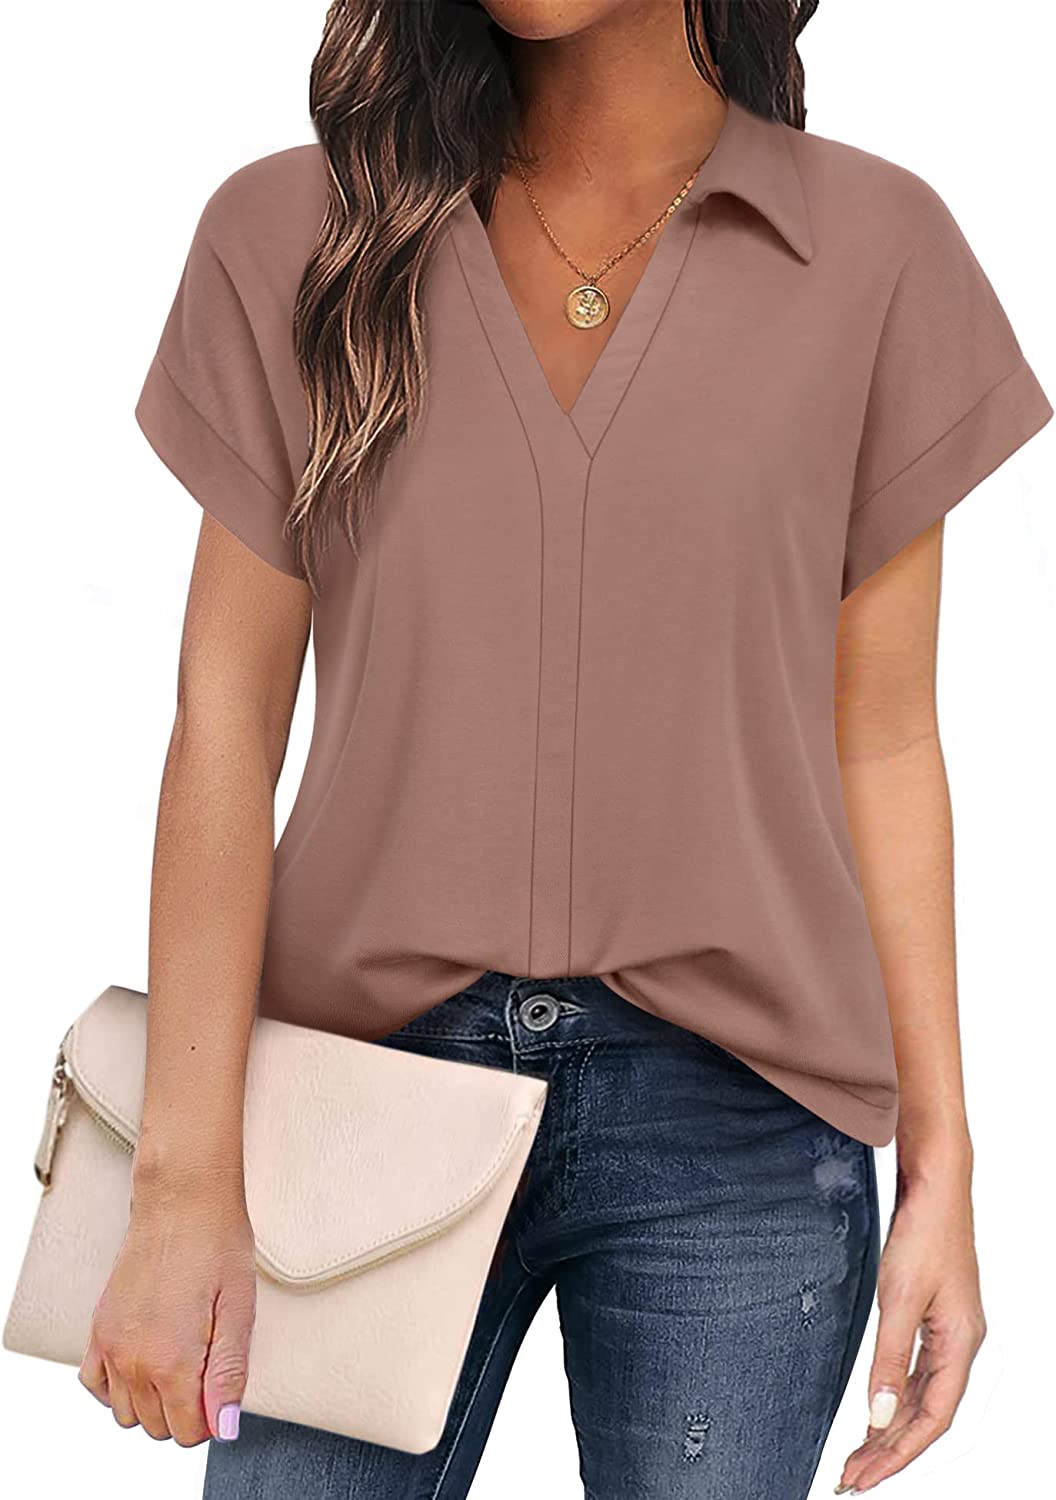 Women's Short Sleeve Tops and Blouses Business Casual Collared Tunic Shirt